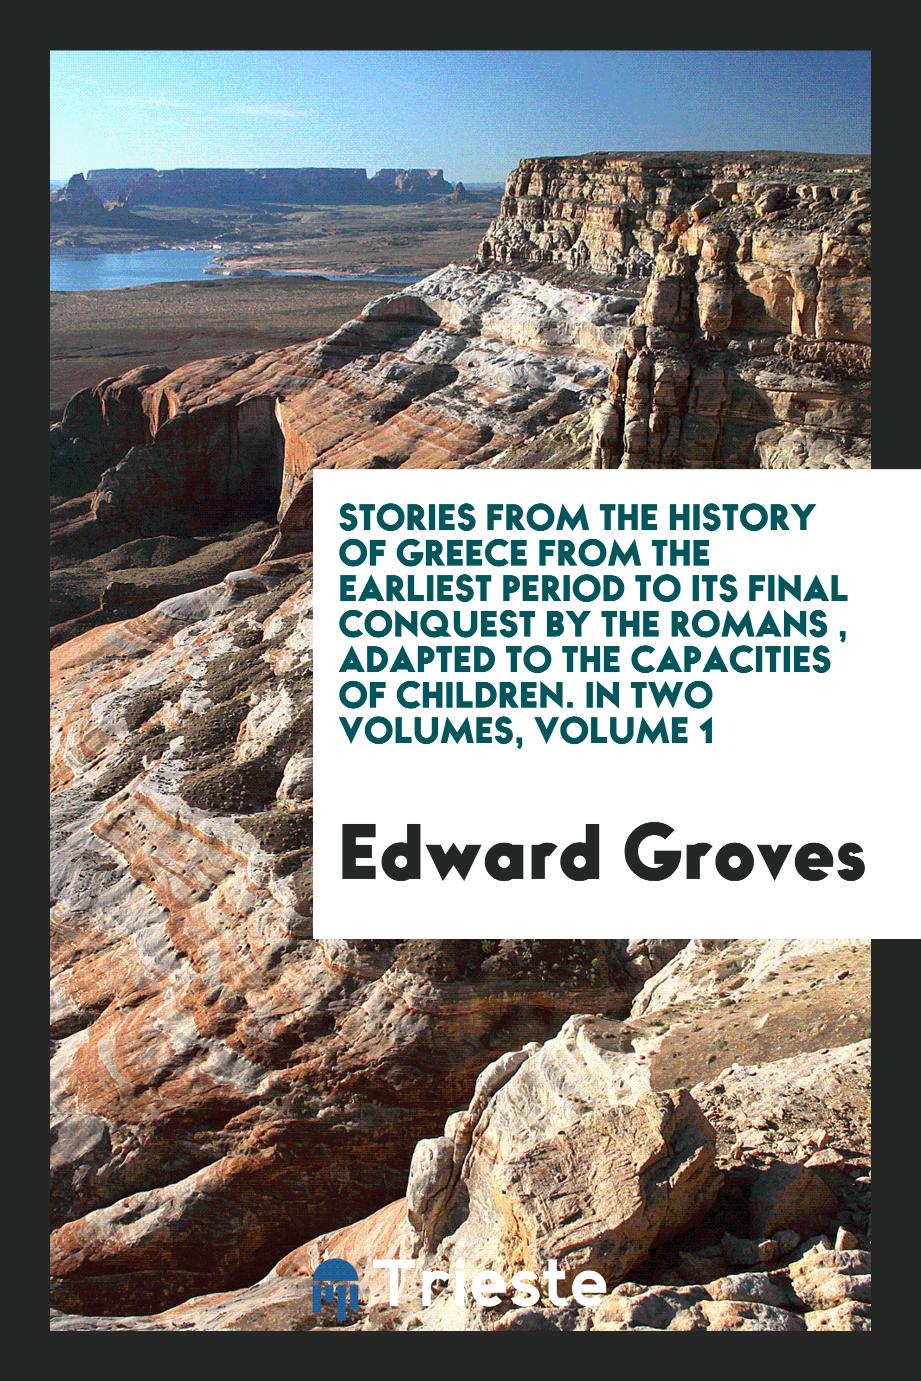 Stories from the History of Greece from the Earliest Period to Its Final Conquest by the Romans , Adapted to the Capacities of Children. In Two Volumes, Volume 1